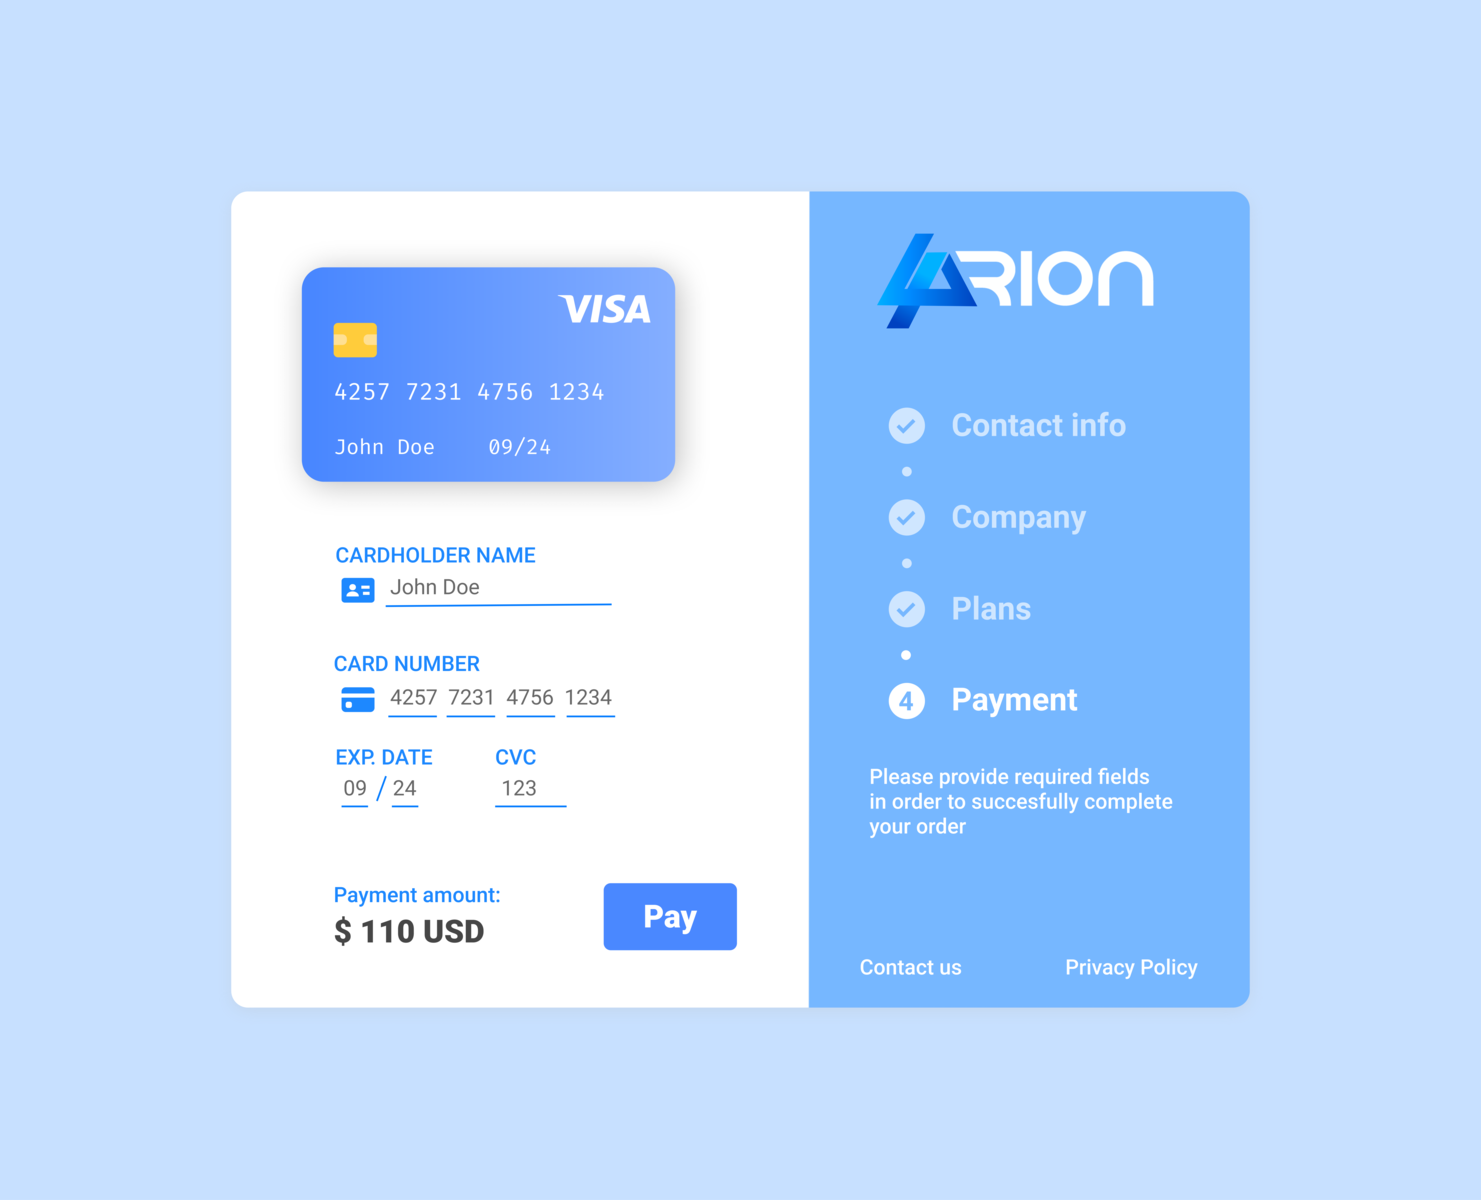 Credit Card Checkout Form By Luis Miguel Arroyave On Dribbble 9426